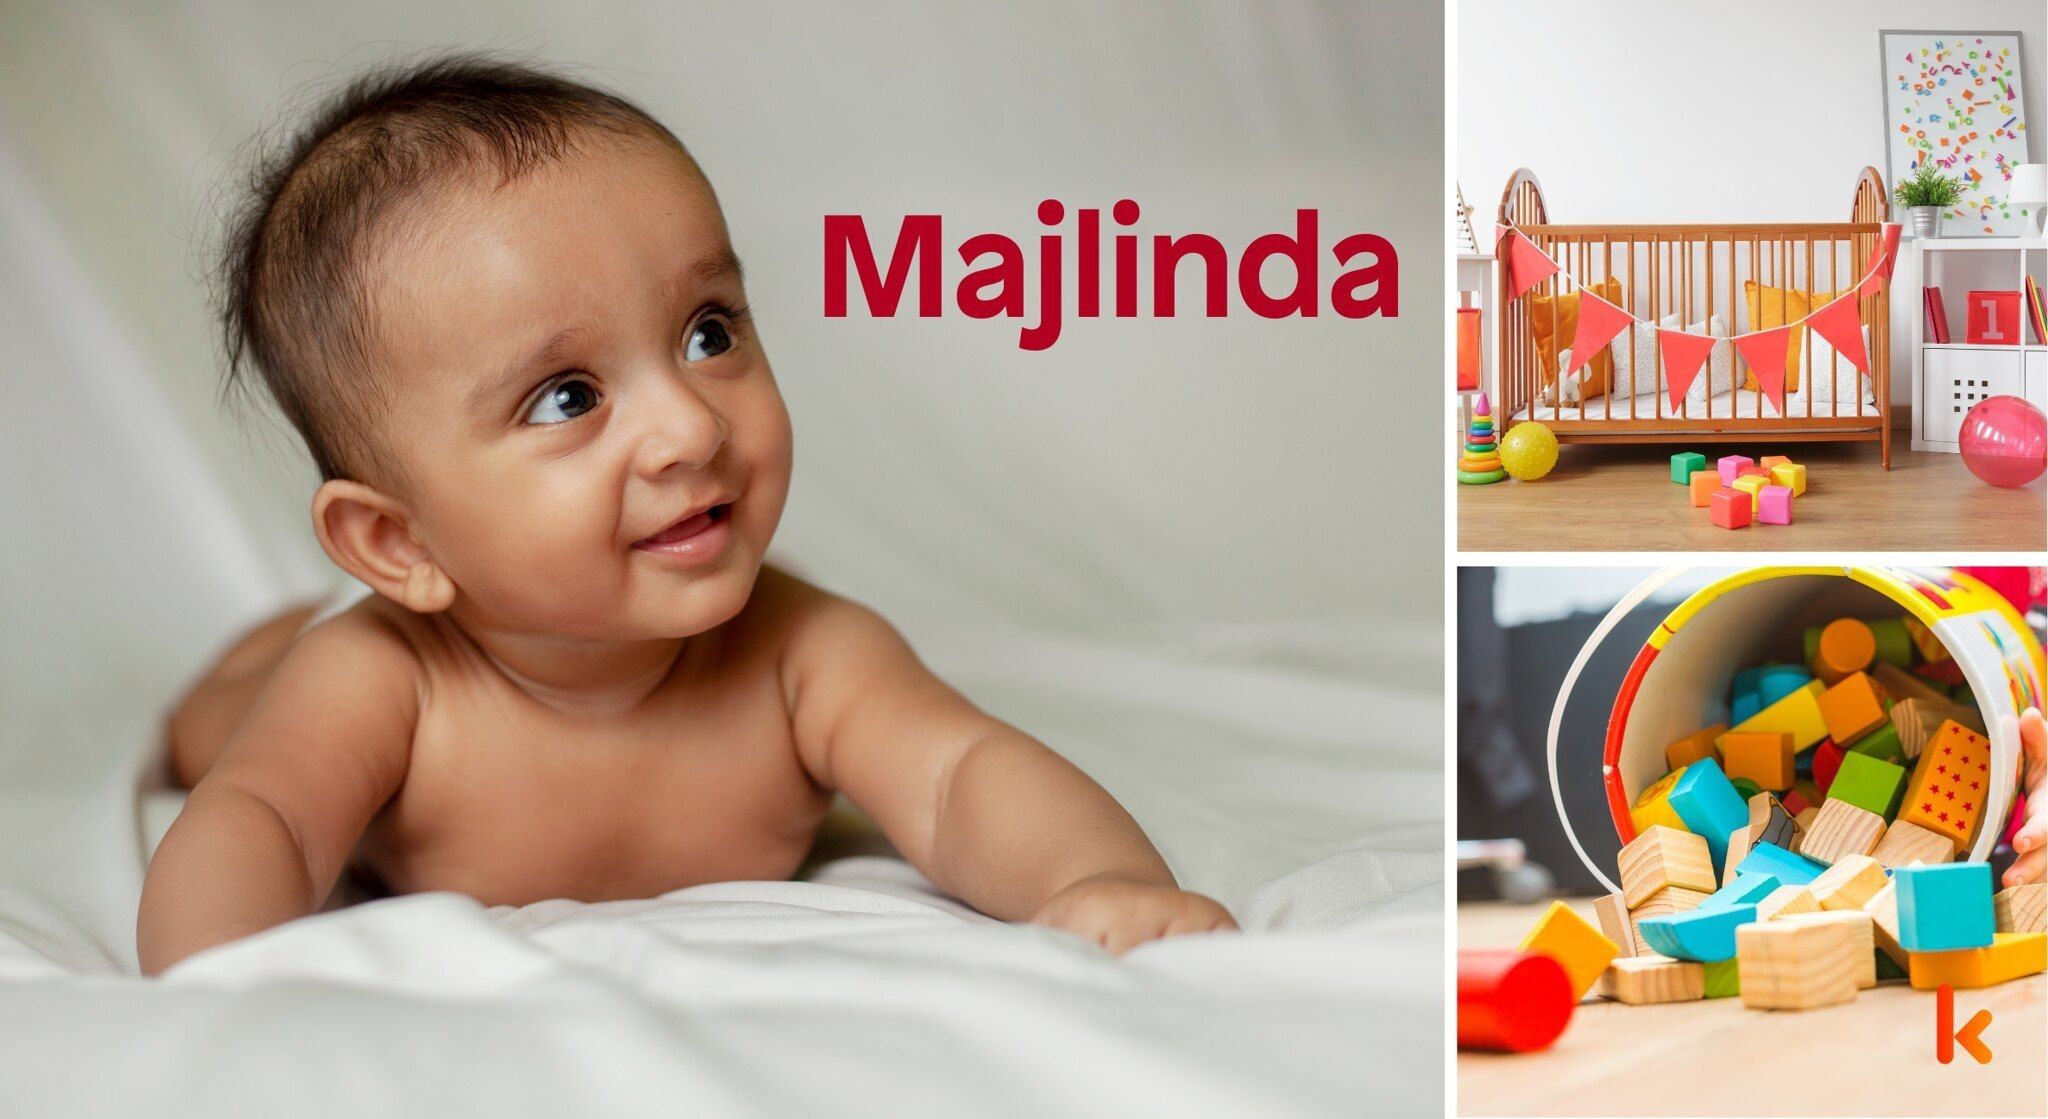 Meaning of the name Majlinda